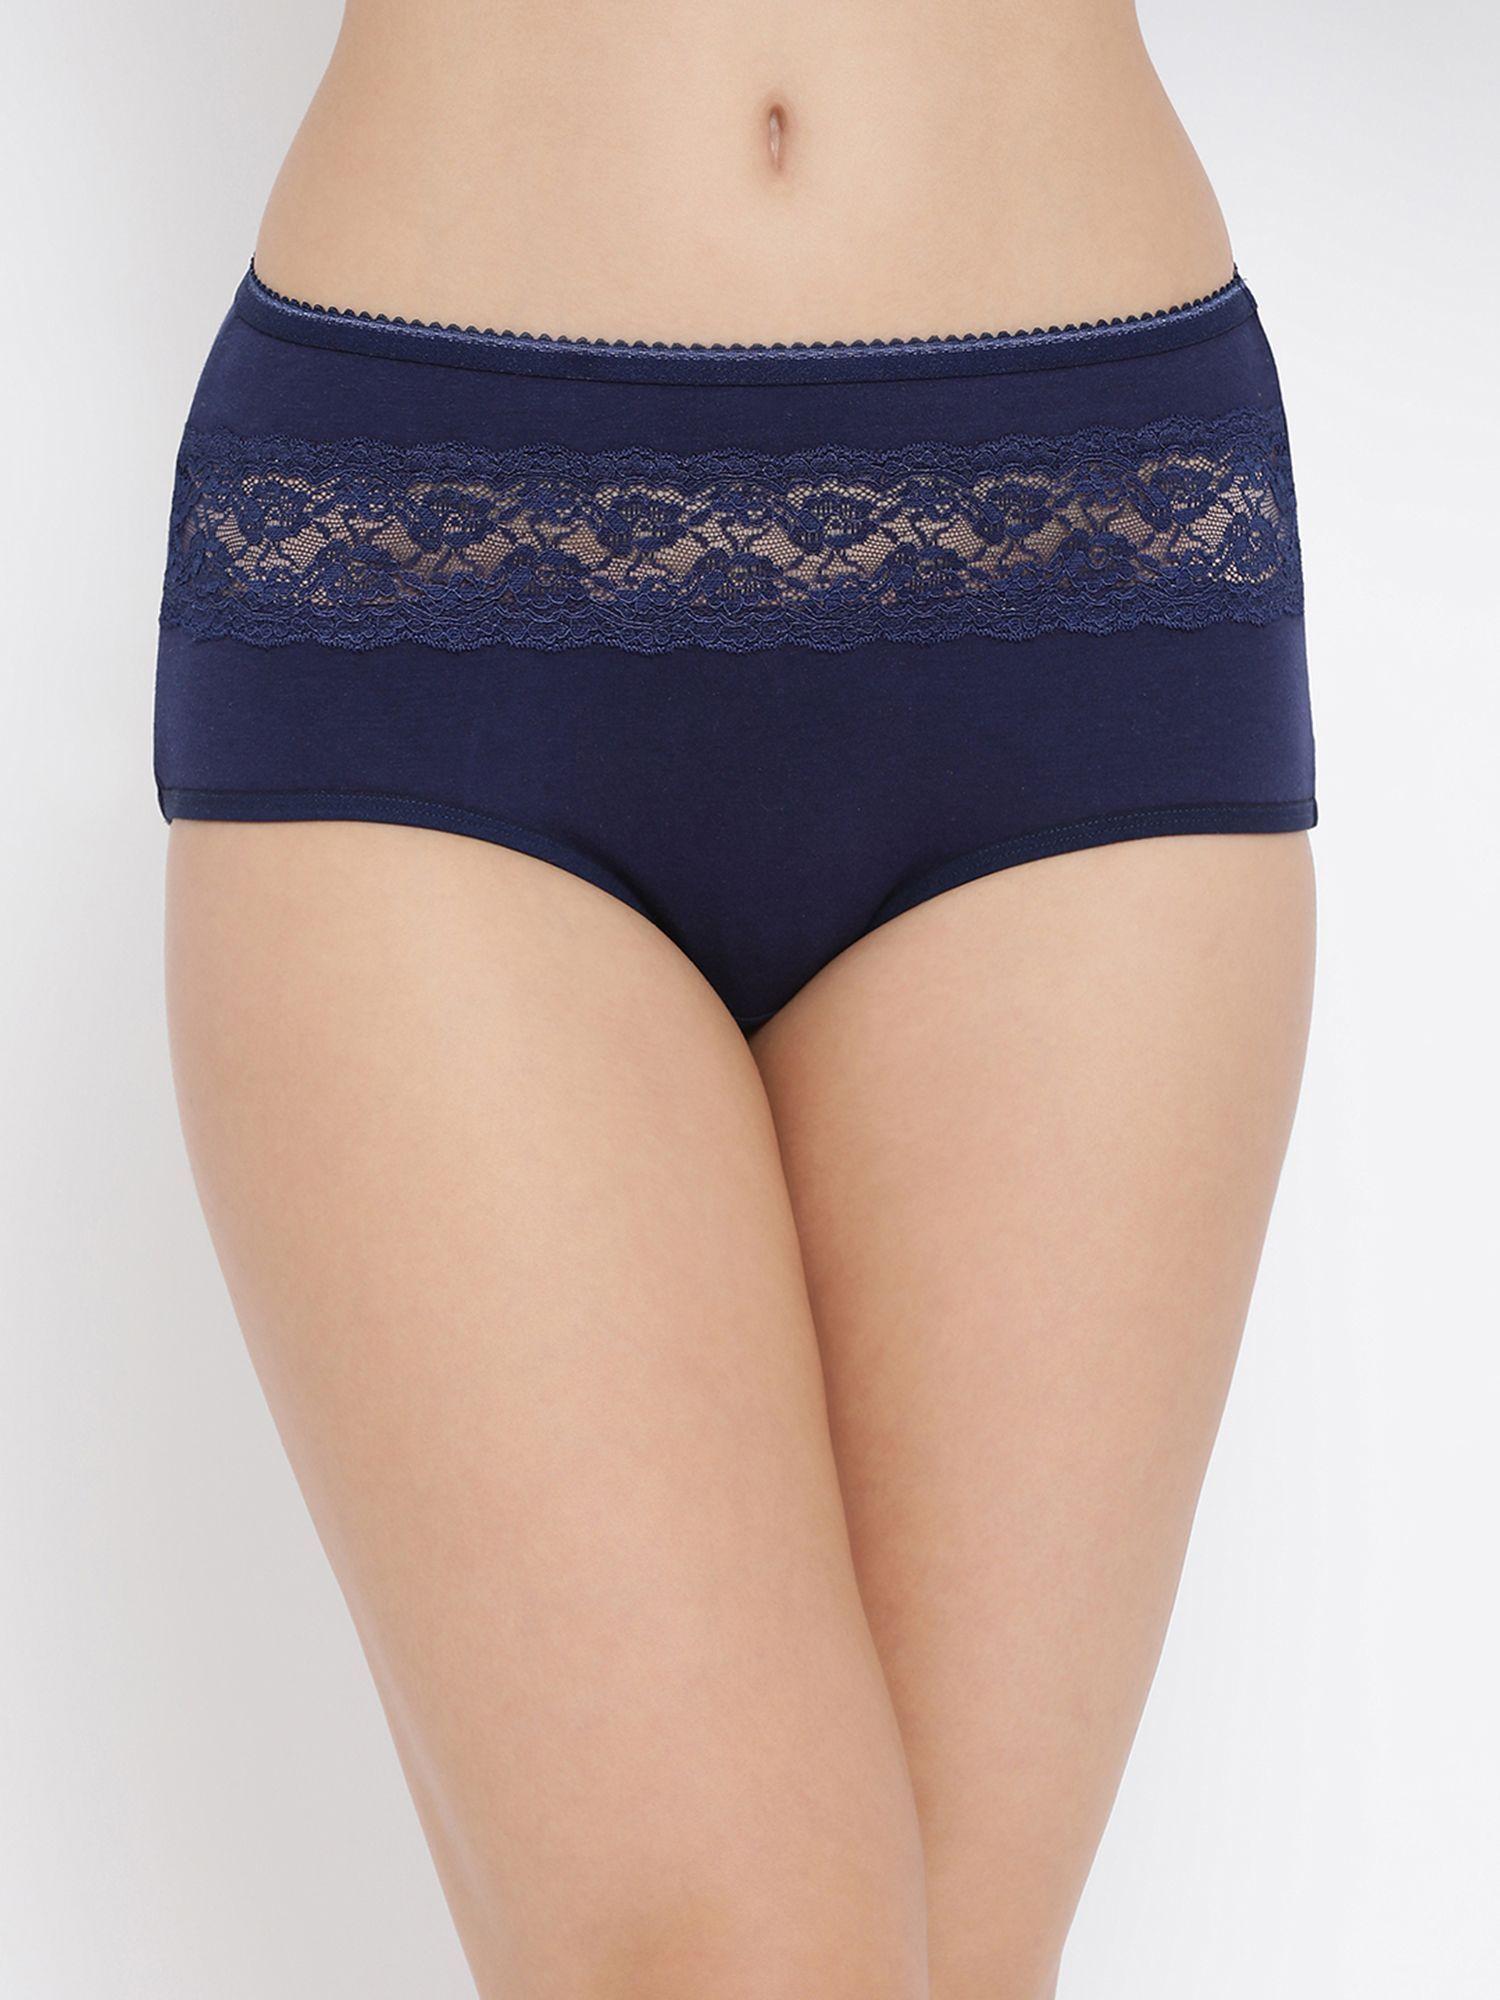 cotton high waist hipster panty with lace insert navy blue